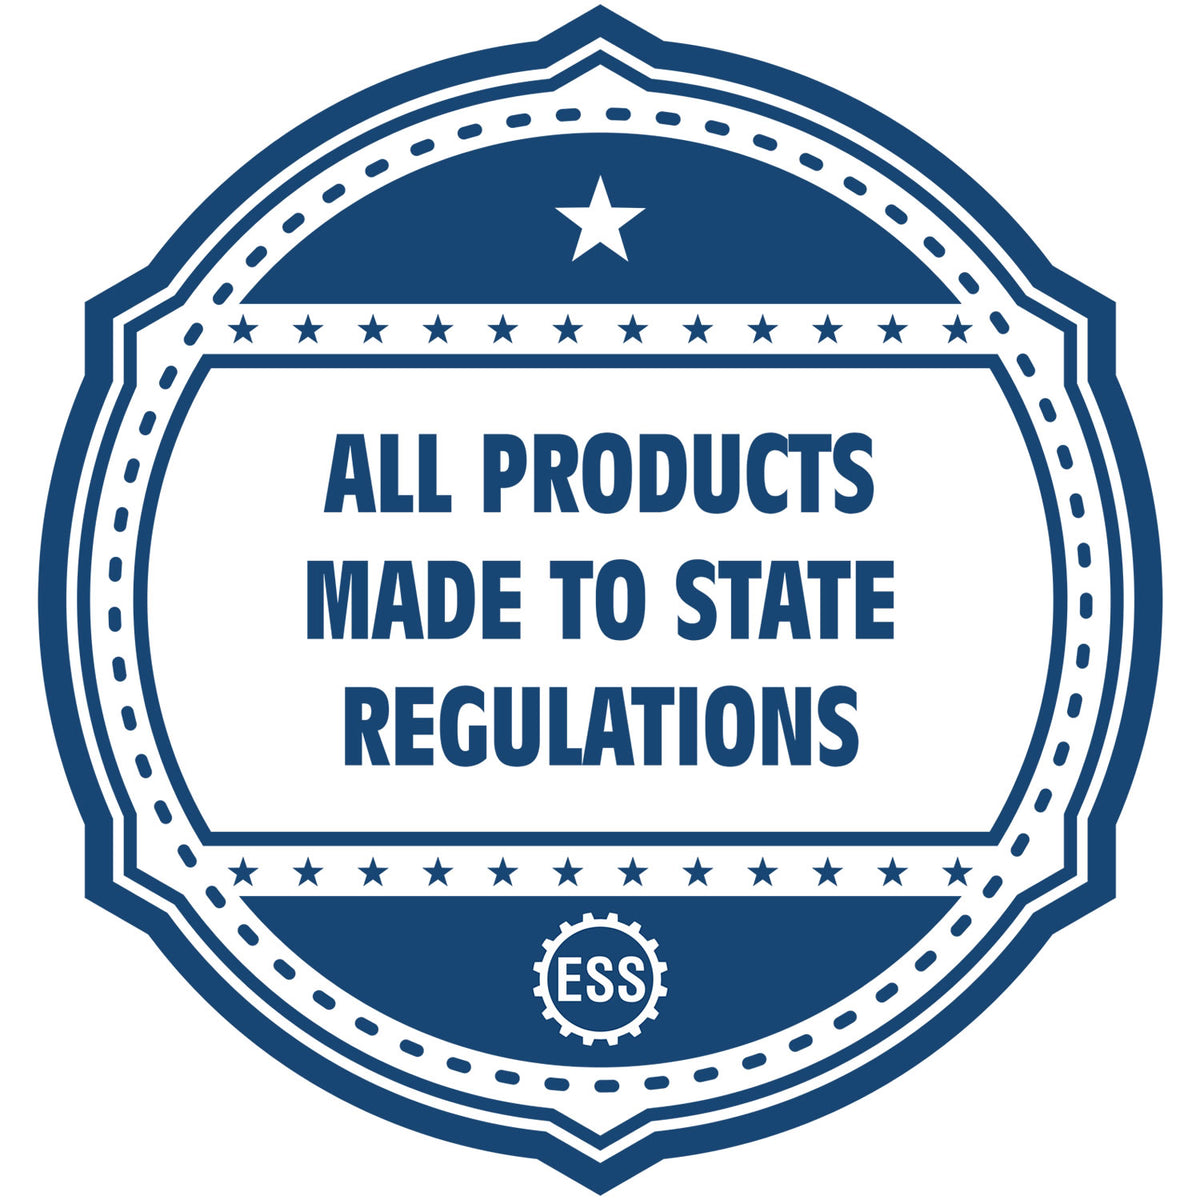 An icon or badge element for the District of Columbia Desk Surveyor Seal Embosser showing that this product is made in compliance with state regulations.